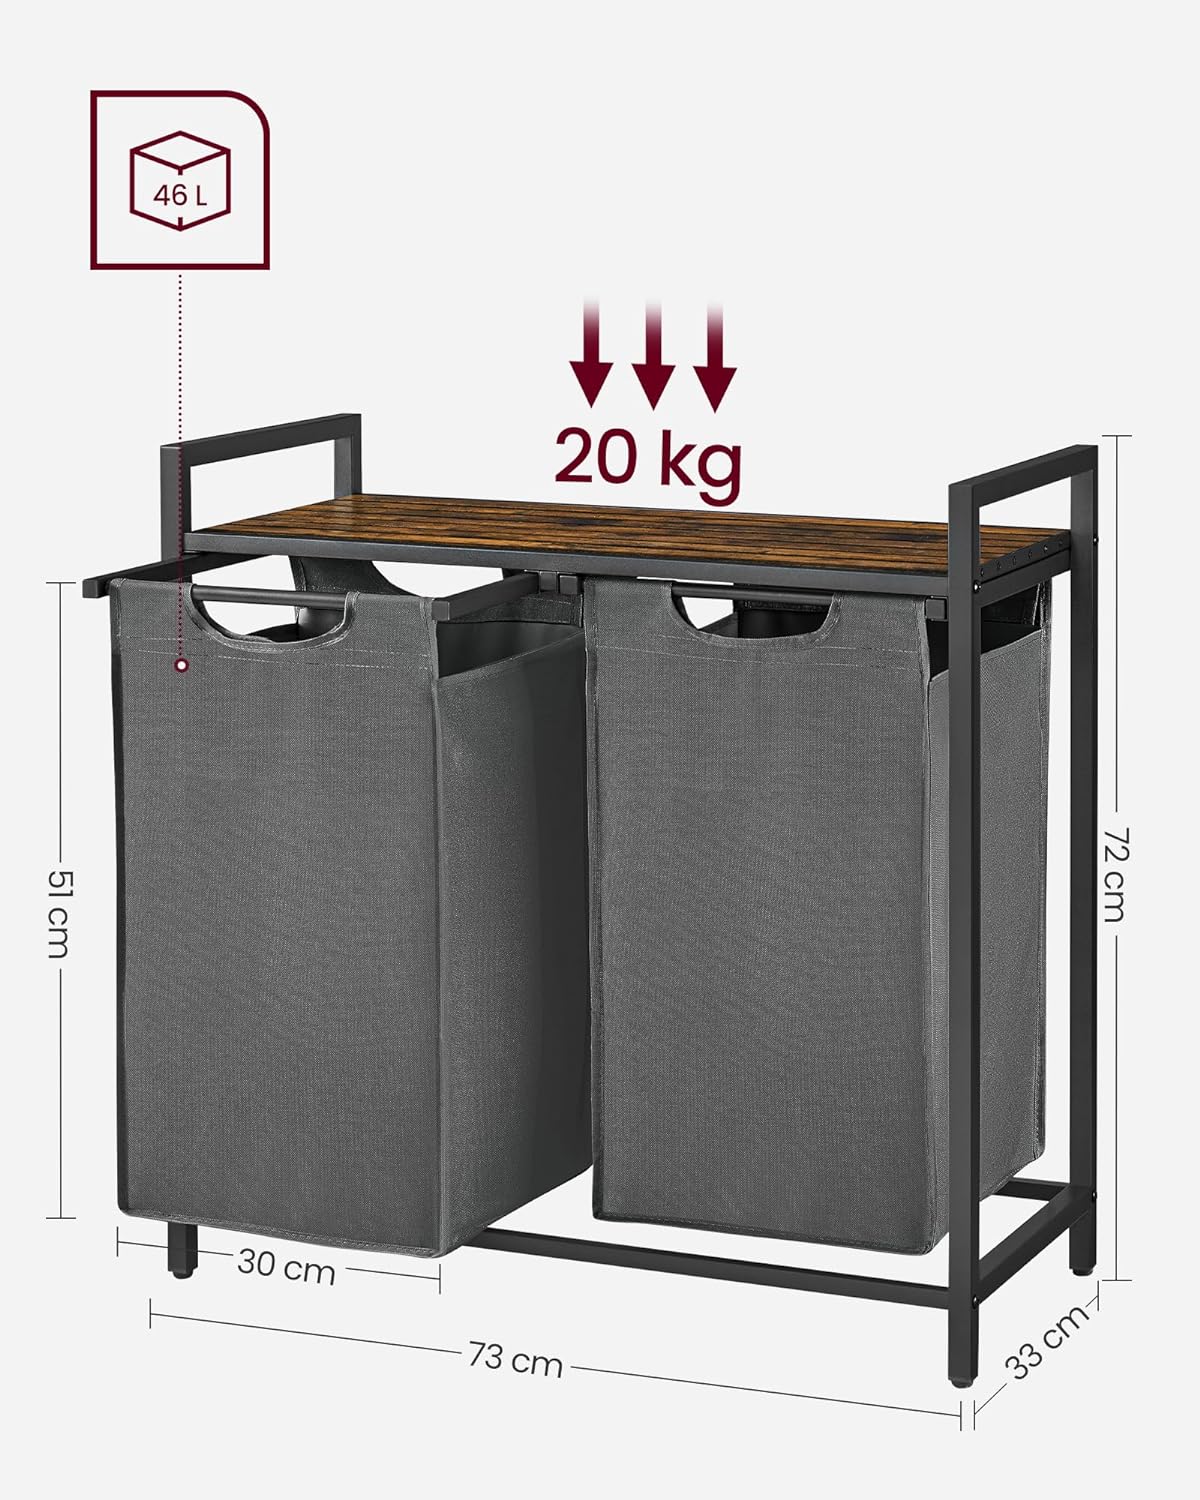 Washing Basket, Laundry Basket, 2 Compartment Laundry Basket, Removable Washing Bags, 2 x 46L, Brown and Grey, VASAGLE, 8